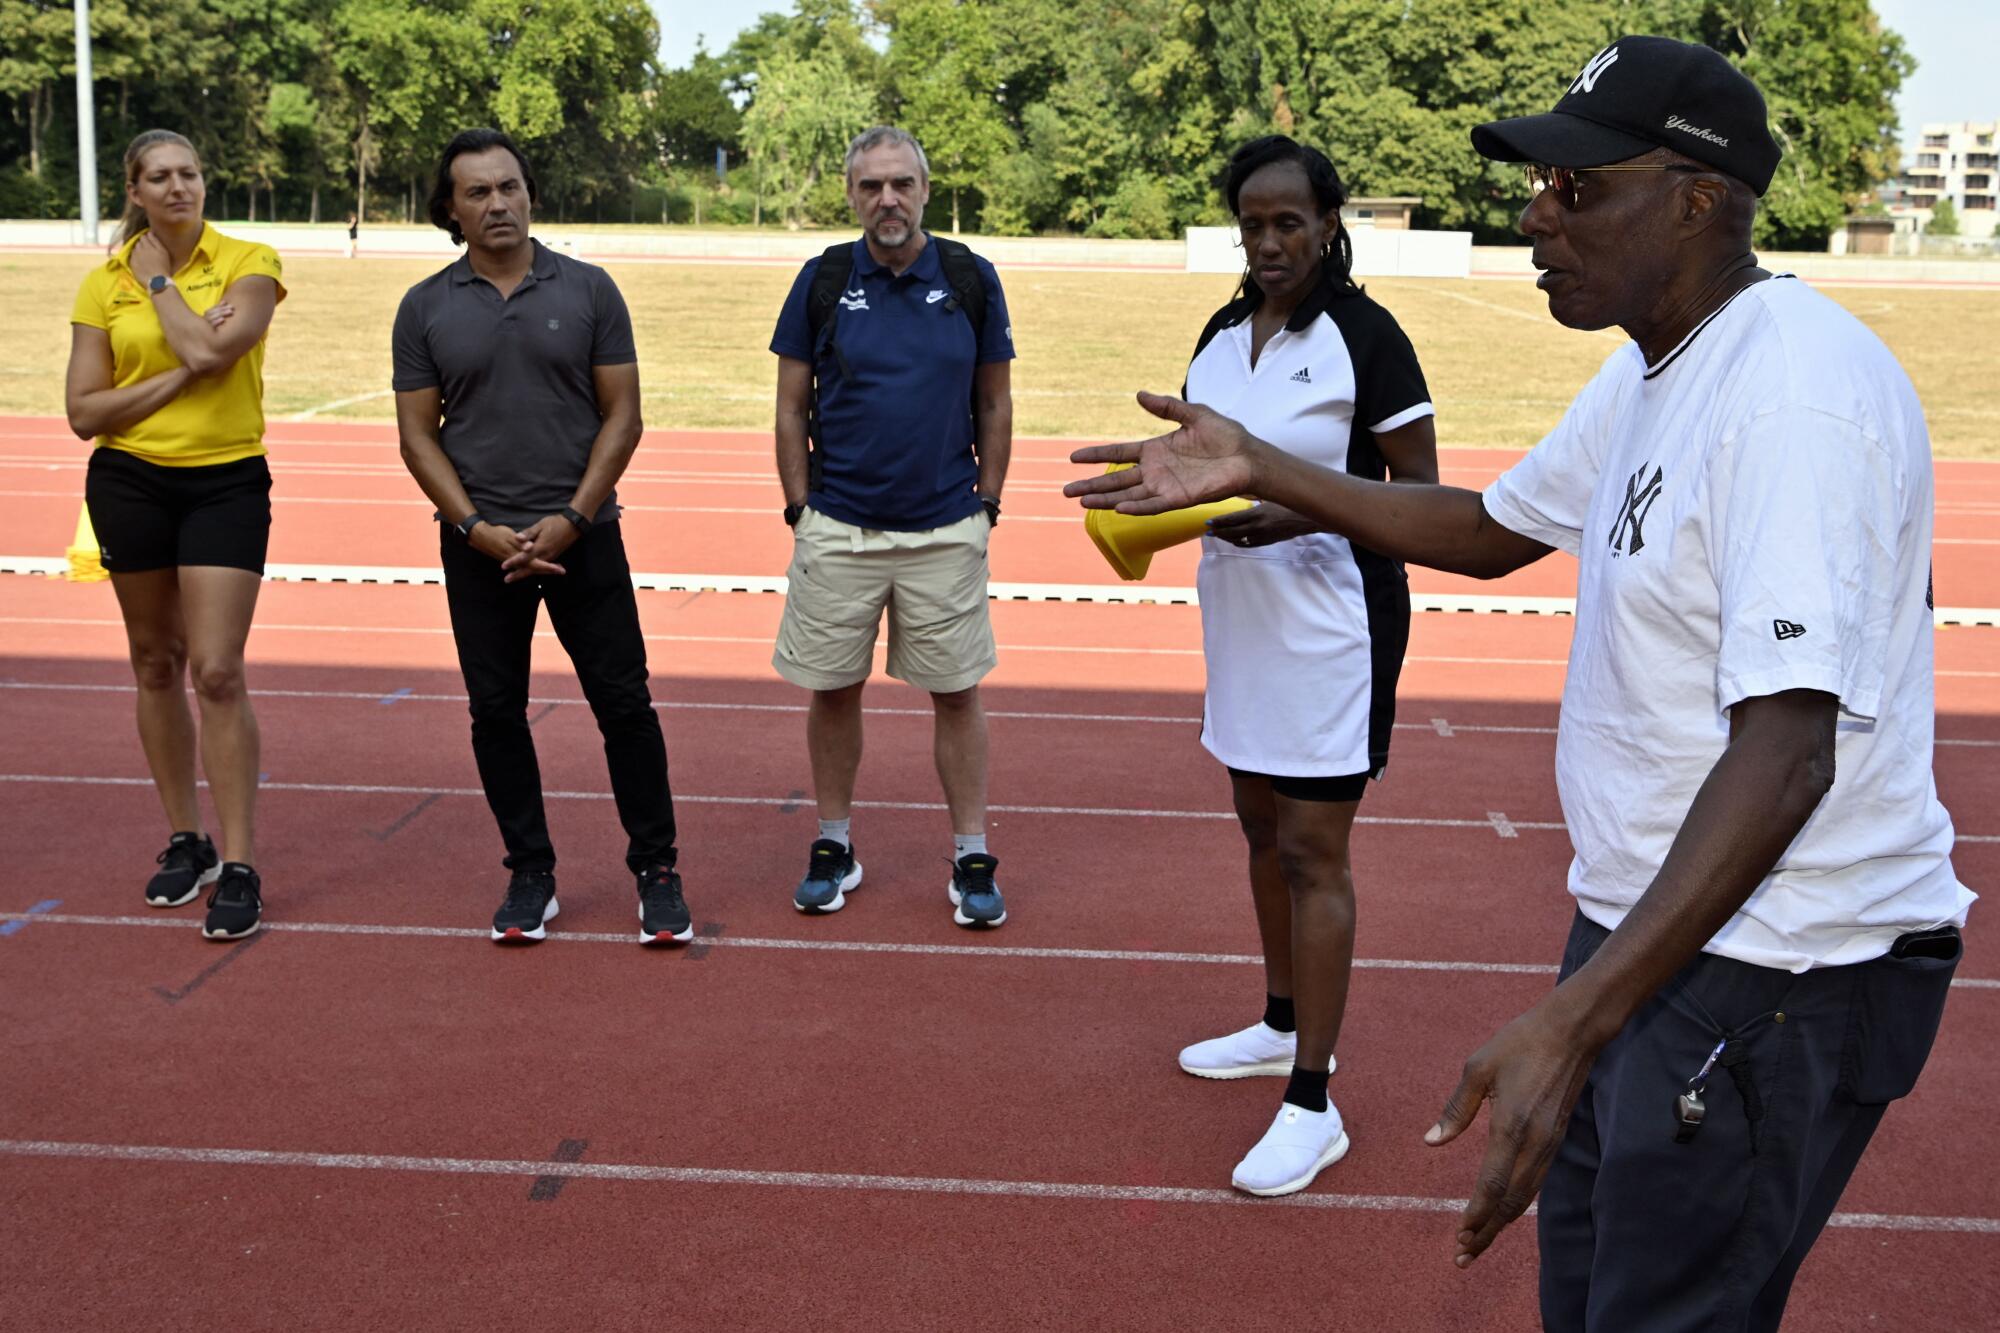 Track and field trainer Bob Kersee and wife Jackie Joyner-Kersee hold a long jump clinic in Vilvoorde, Belgium.